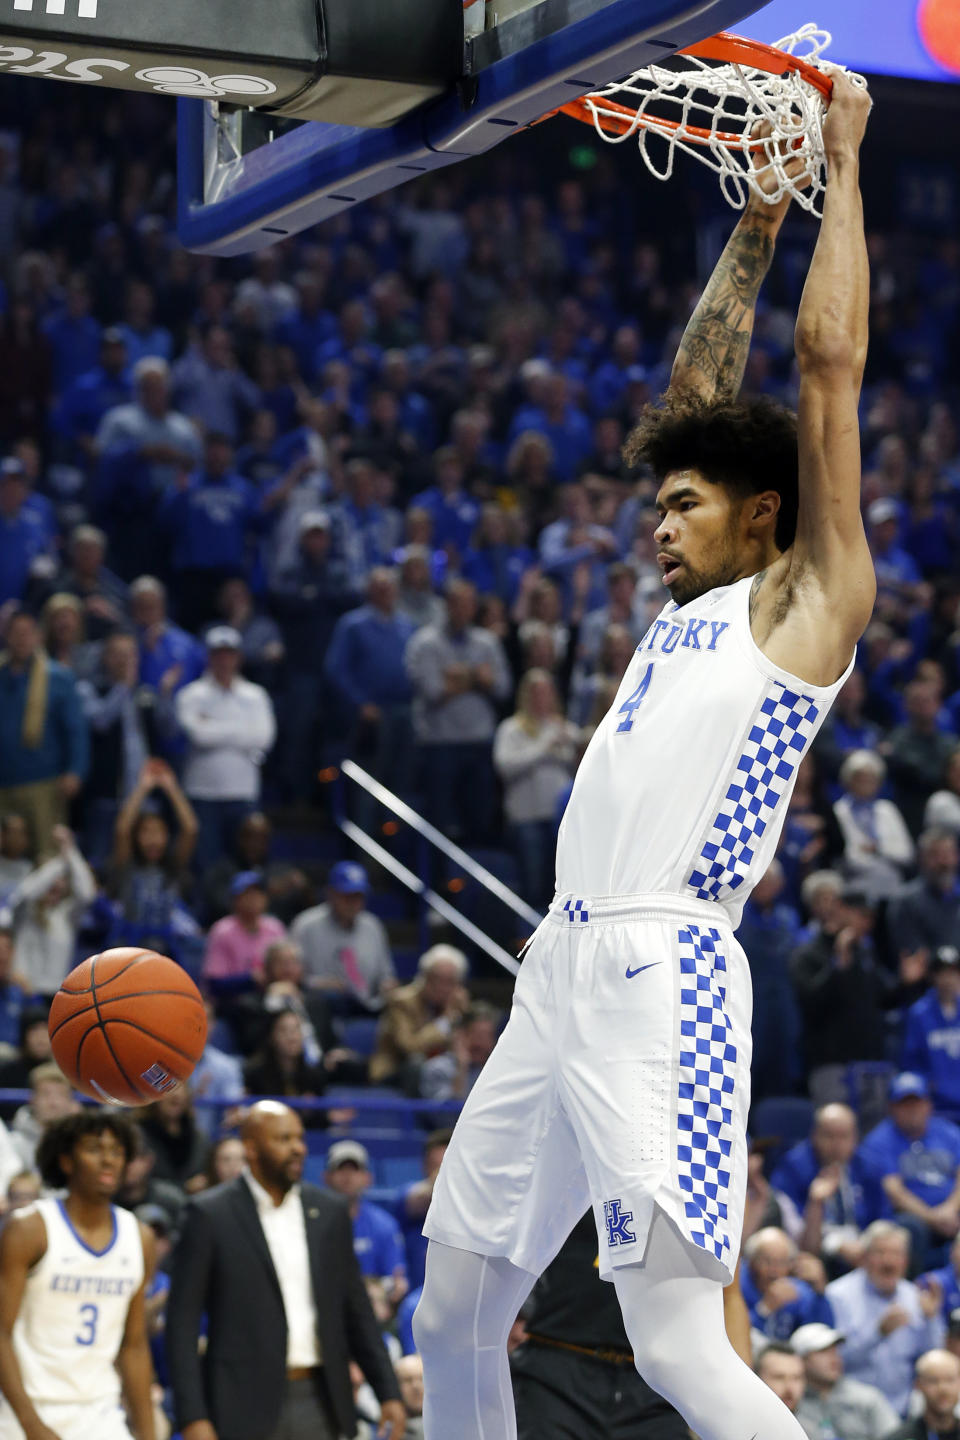 Kentucky's Nick Richards dunks during the first half of an NCAA college basketball game against Missouri in Lexington, Ky., Saturday, Jan 4, 2020. (AP Photo/James Crisp)